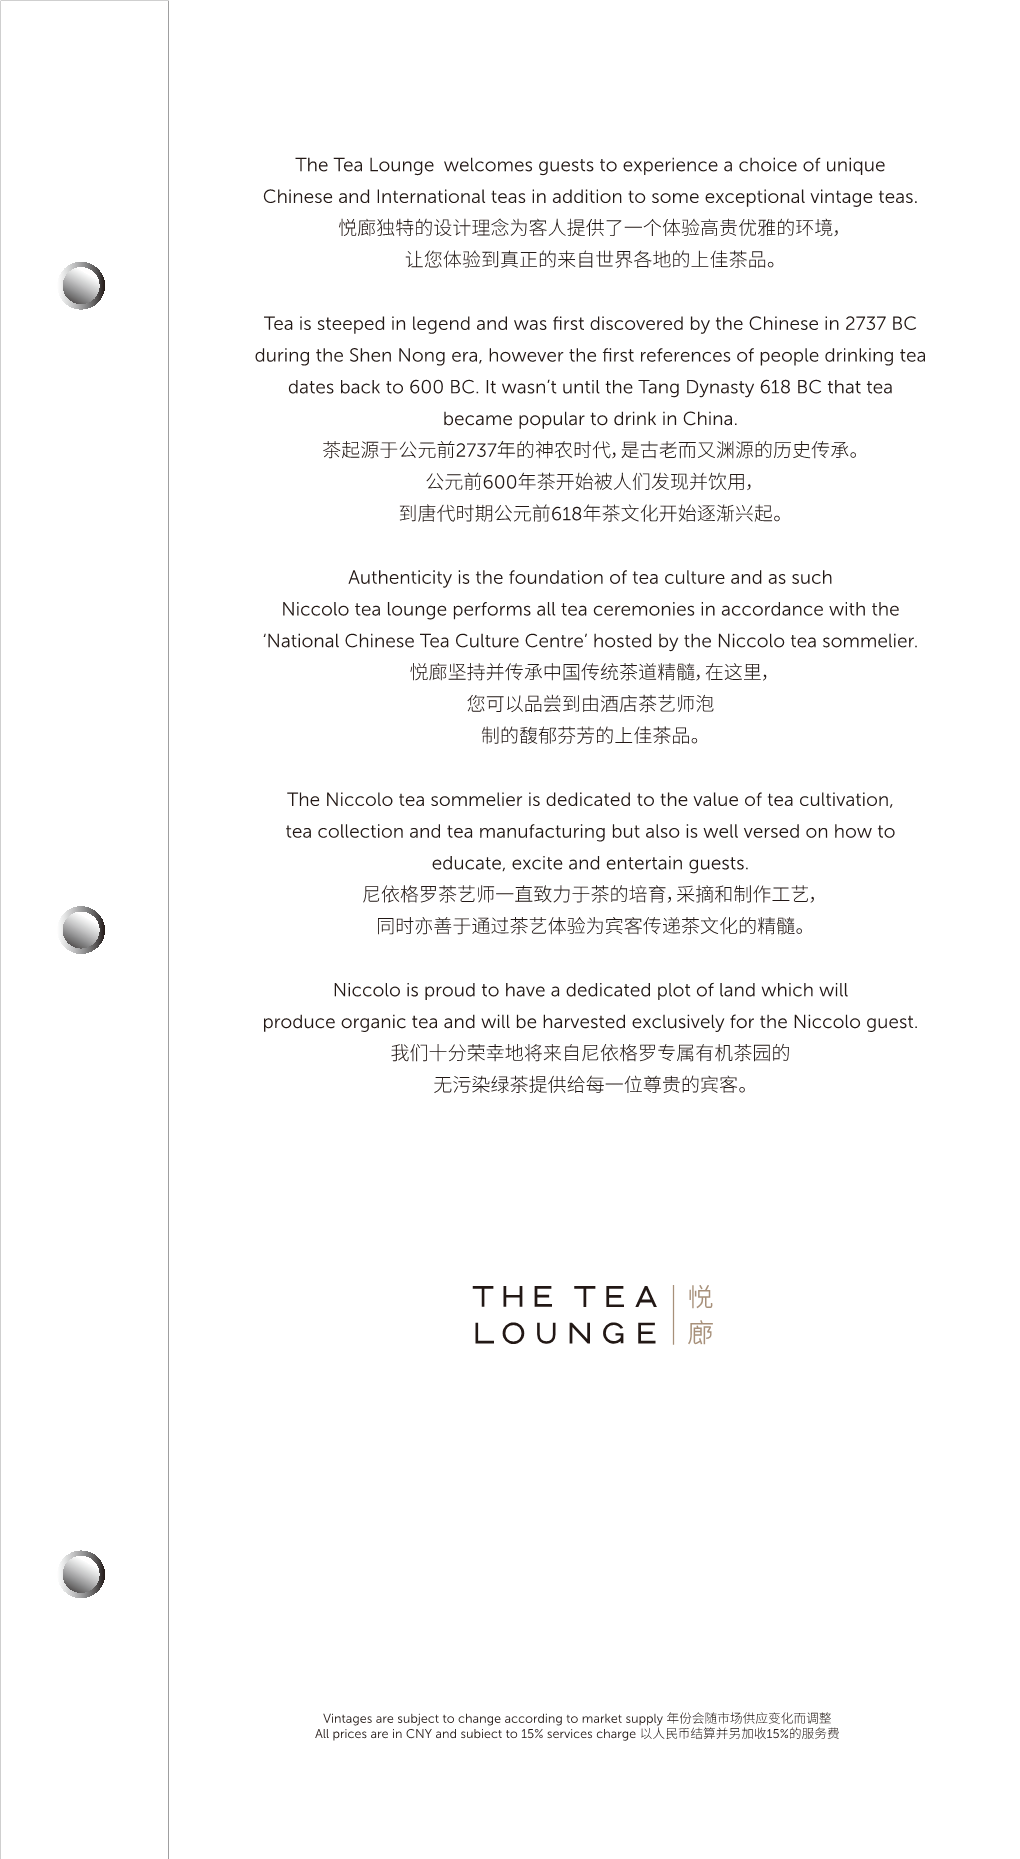 The Tea Lounge Welcomes Guests to Experience a Choice of Unique Chinese and International Teas in Addition to Some Exceptional